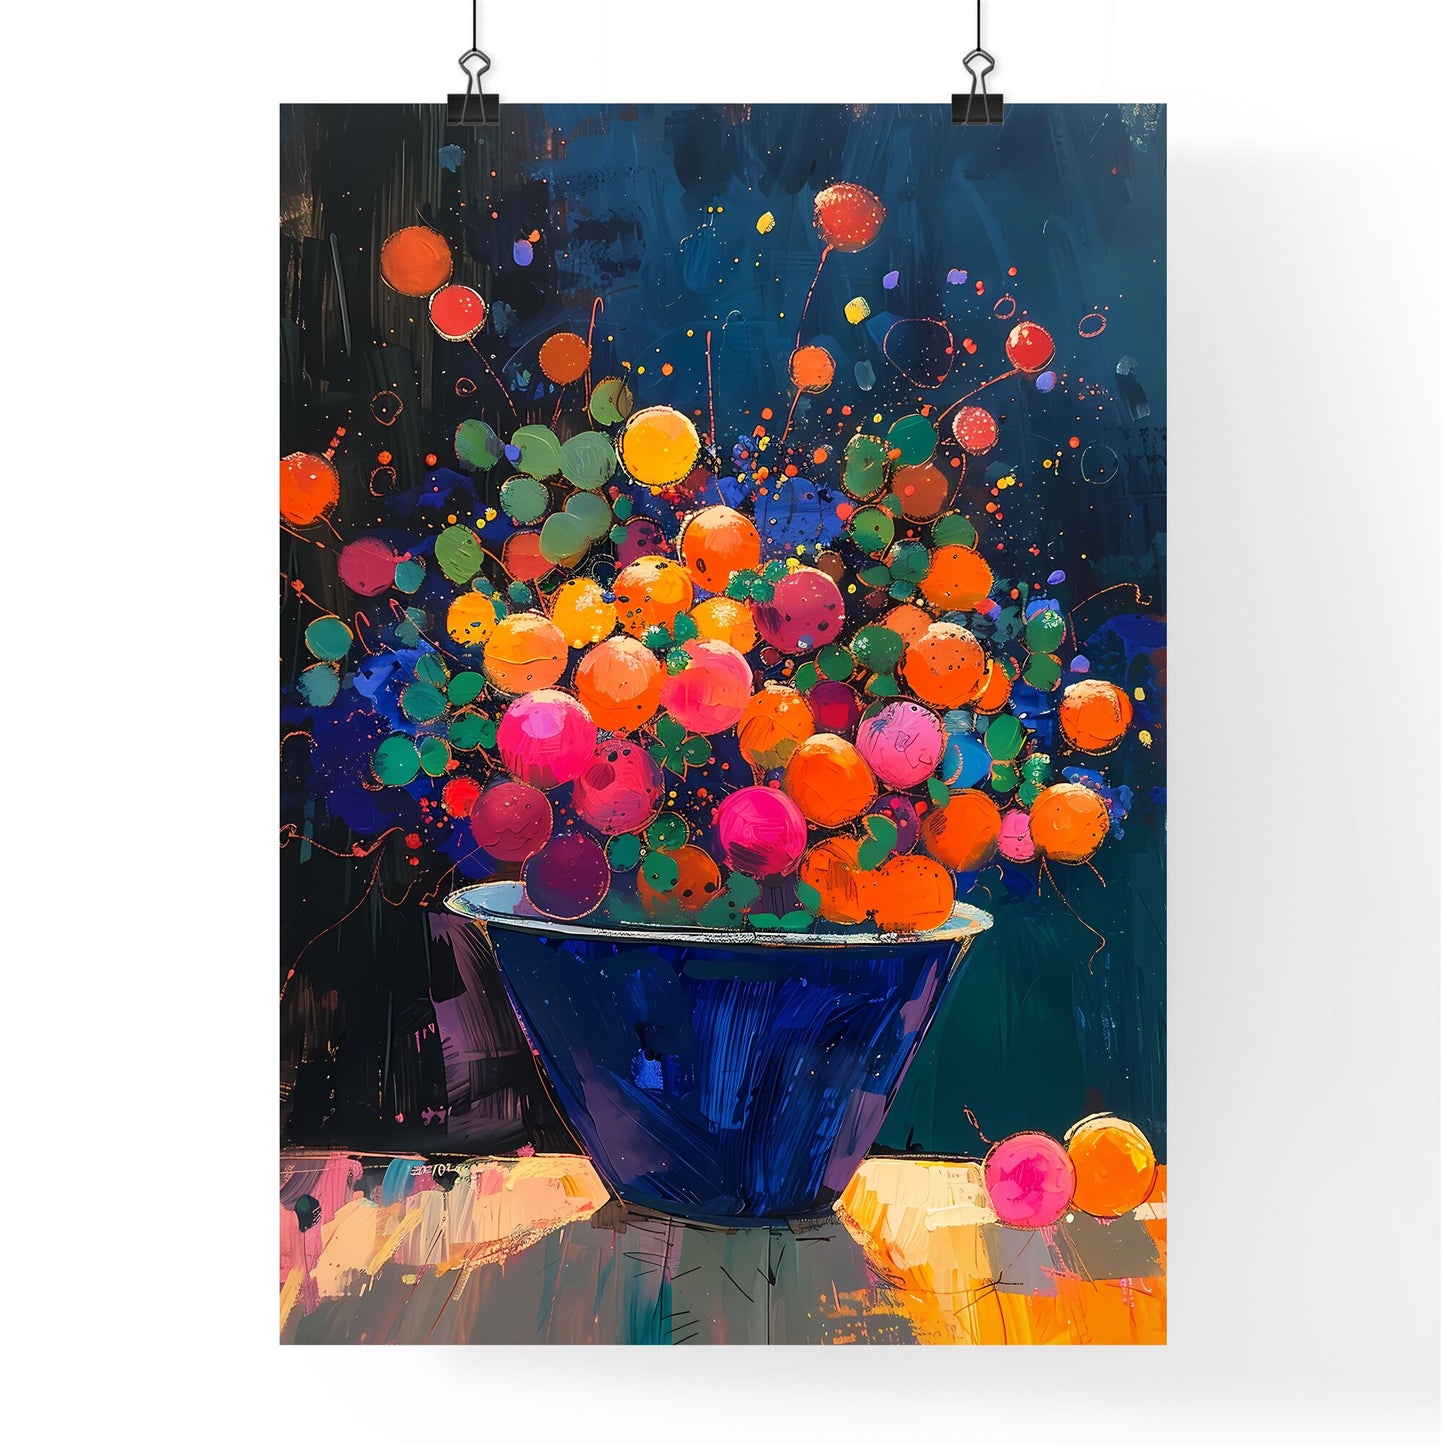 Abstract Fruit Bowl: Whimsical Multimedia Painting with Vibrant Colors and Kid-Like Elements Inspired by Zaire School of Popular Painting Default Title